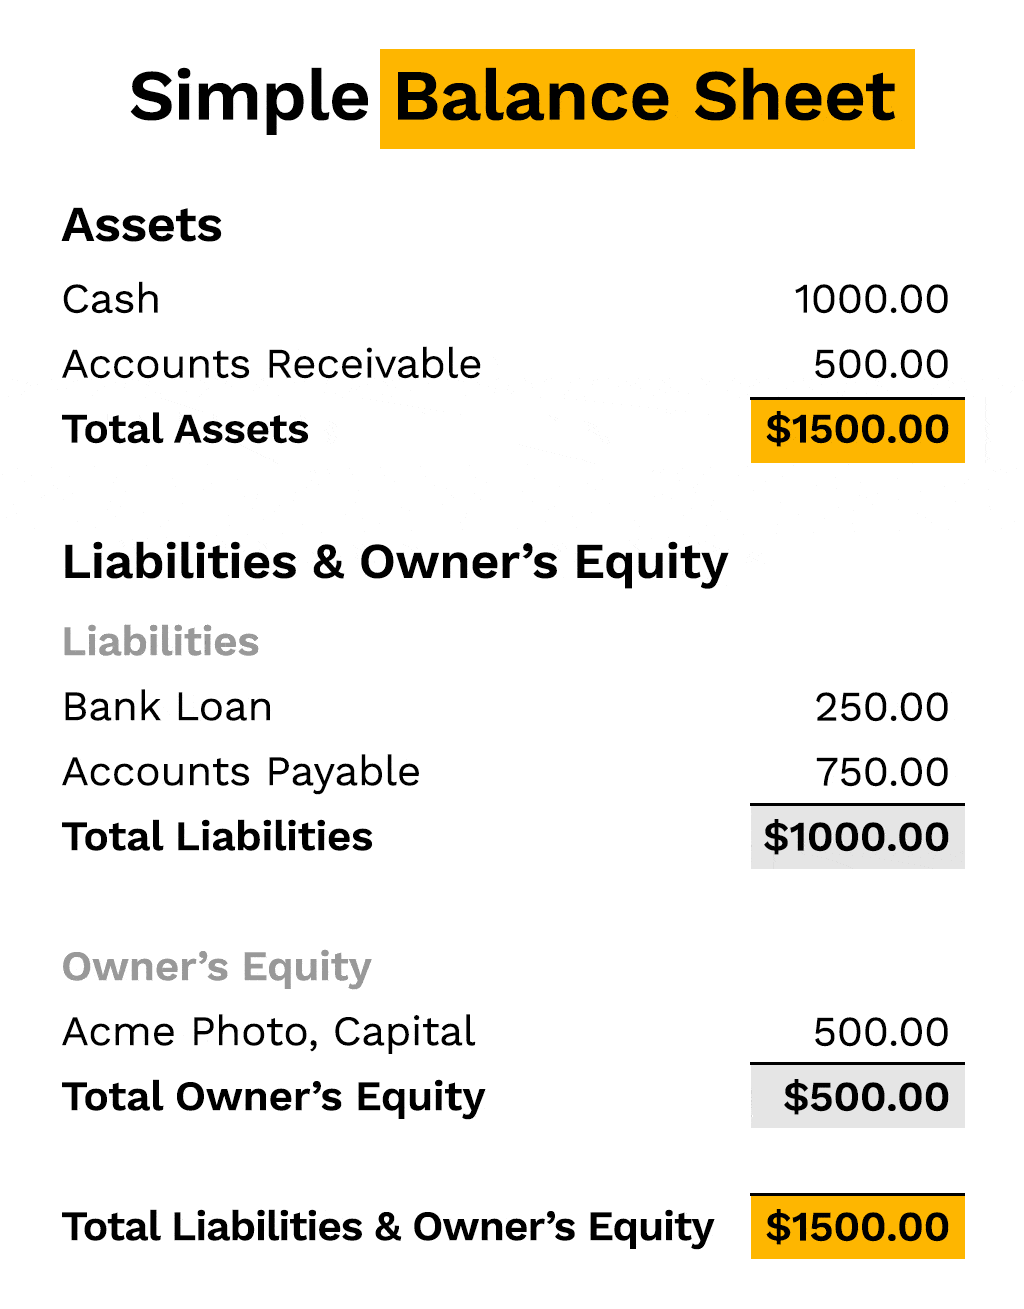 Simple balance sheet for small business owners.